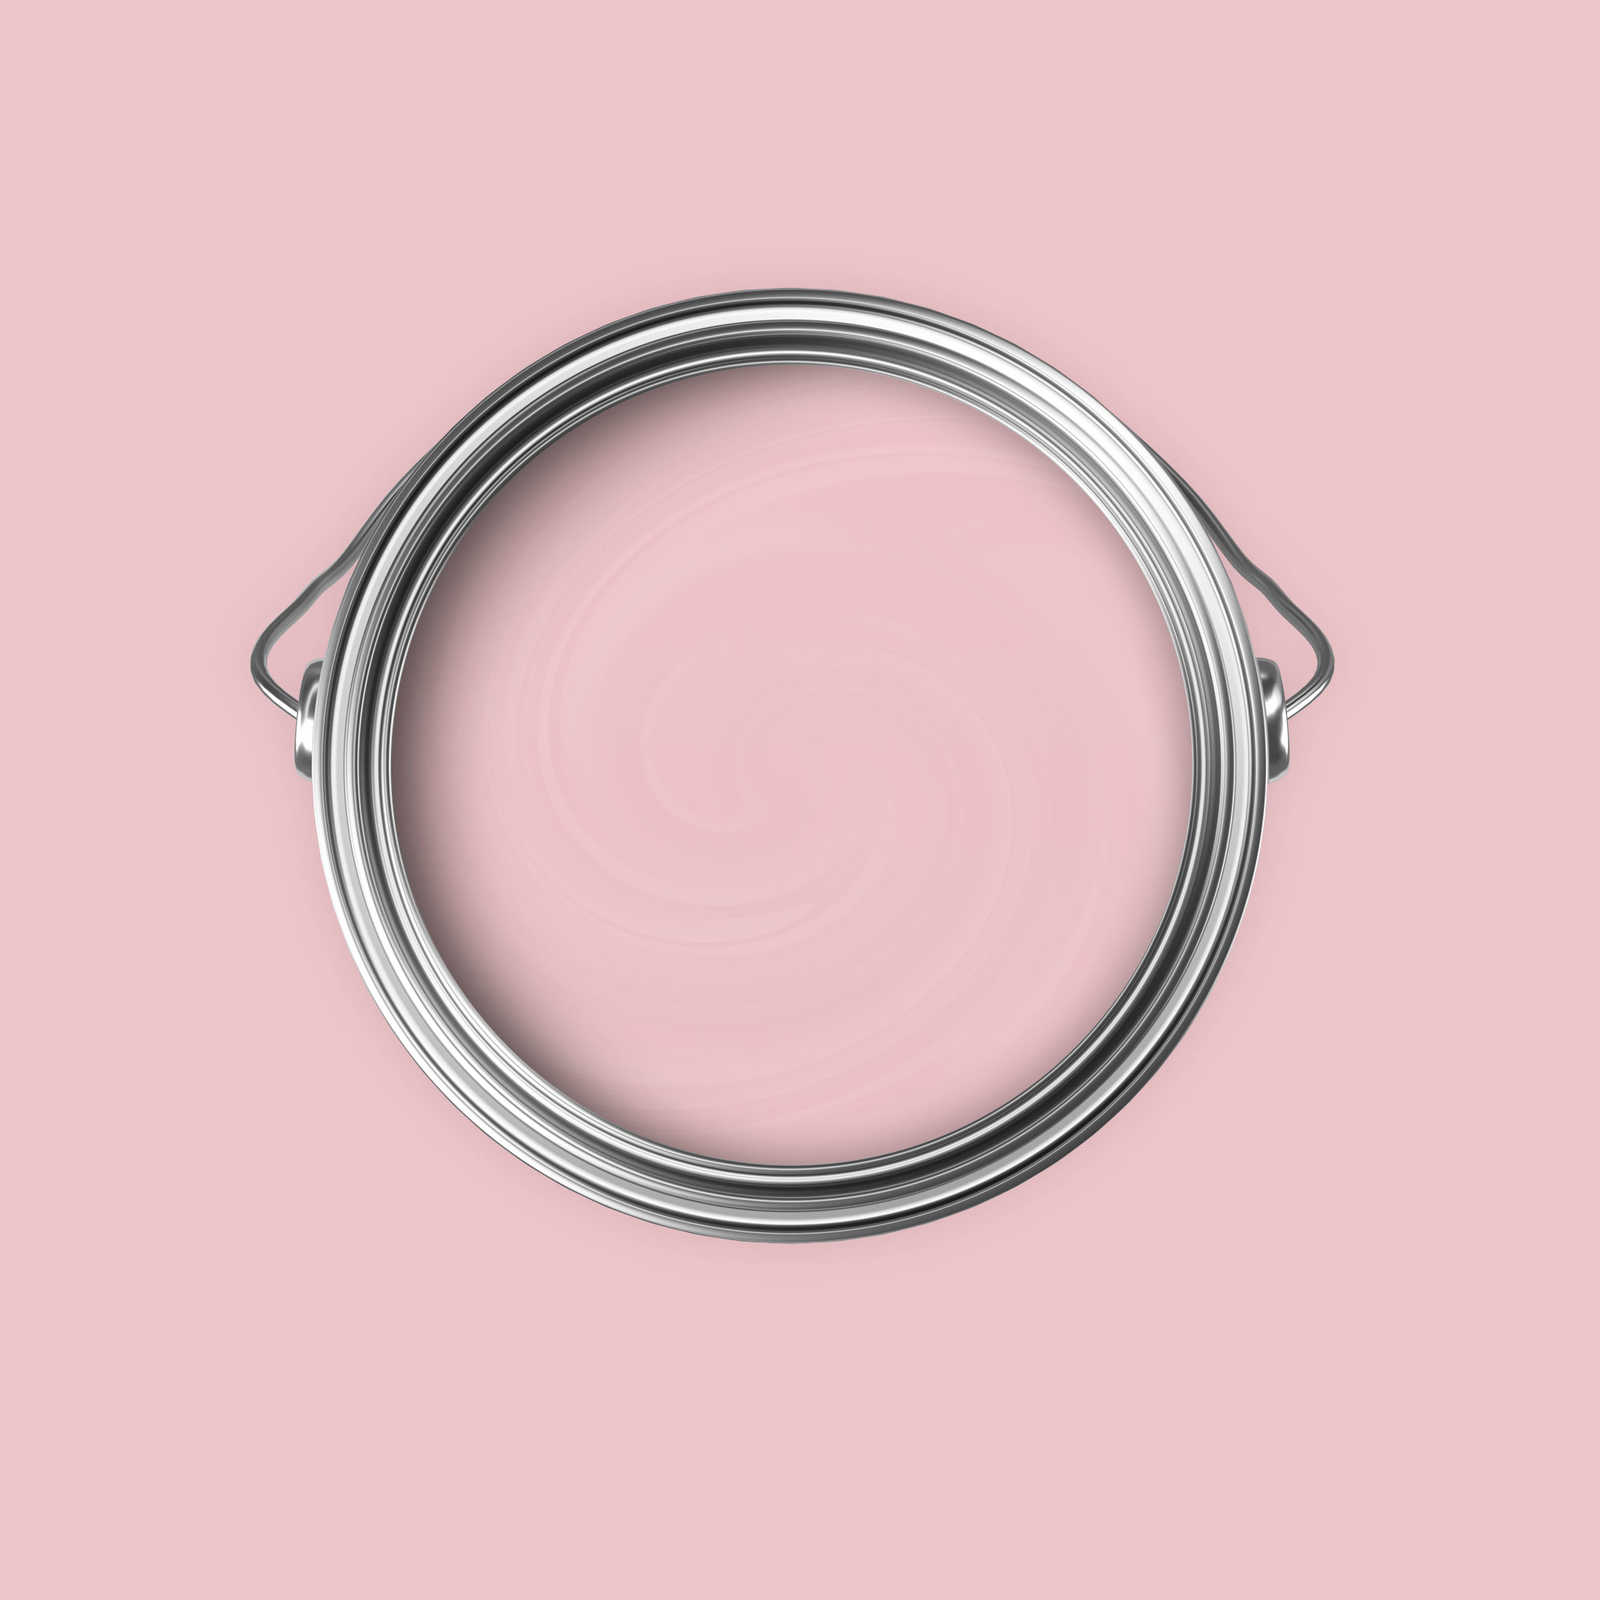             Premium Wall Paint lovely pink »Blooming Blossom« NW1016 – 5 litre
        